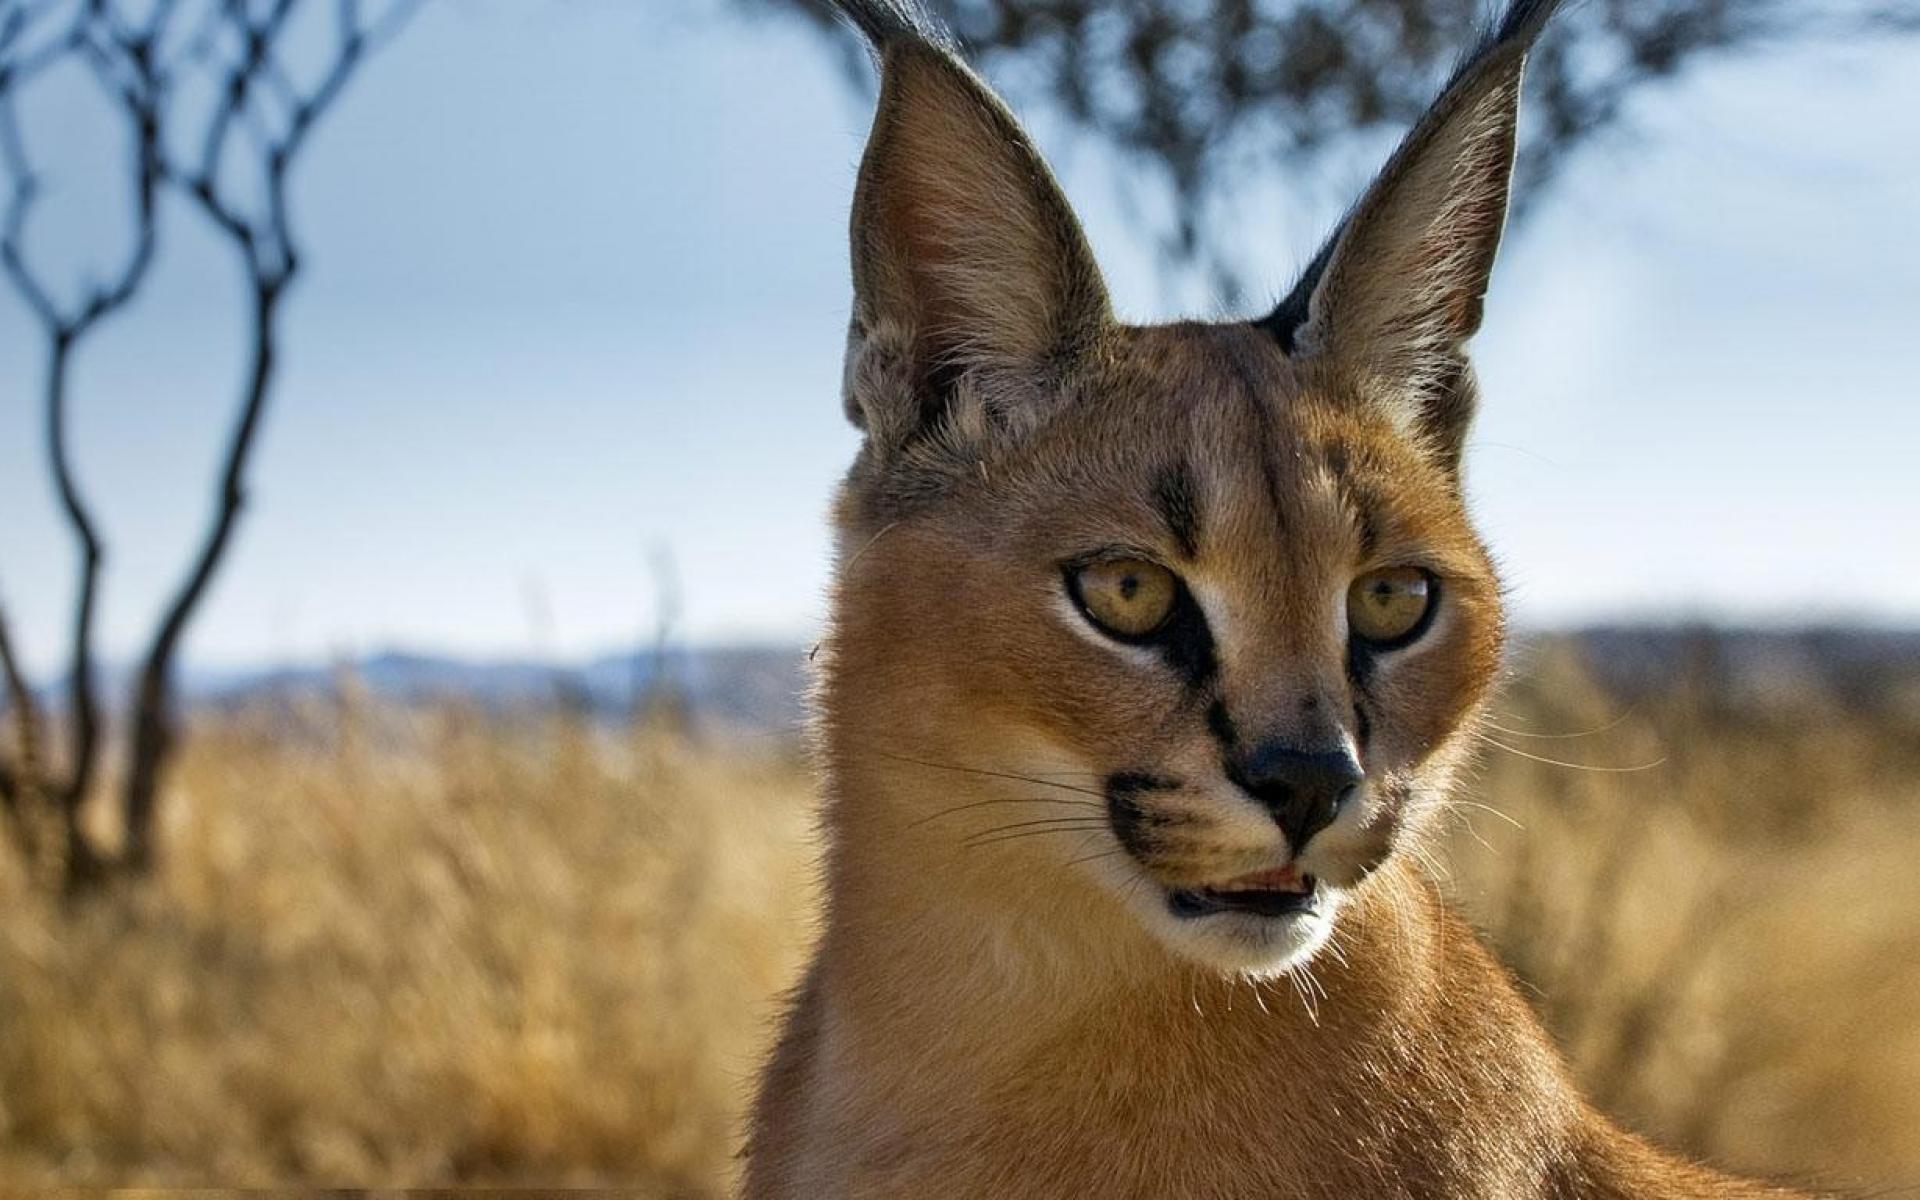 Animals namibia caracal bing blurred background wallpaper 64988